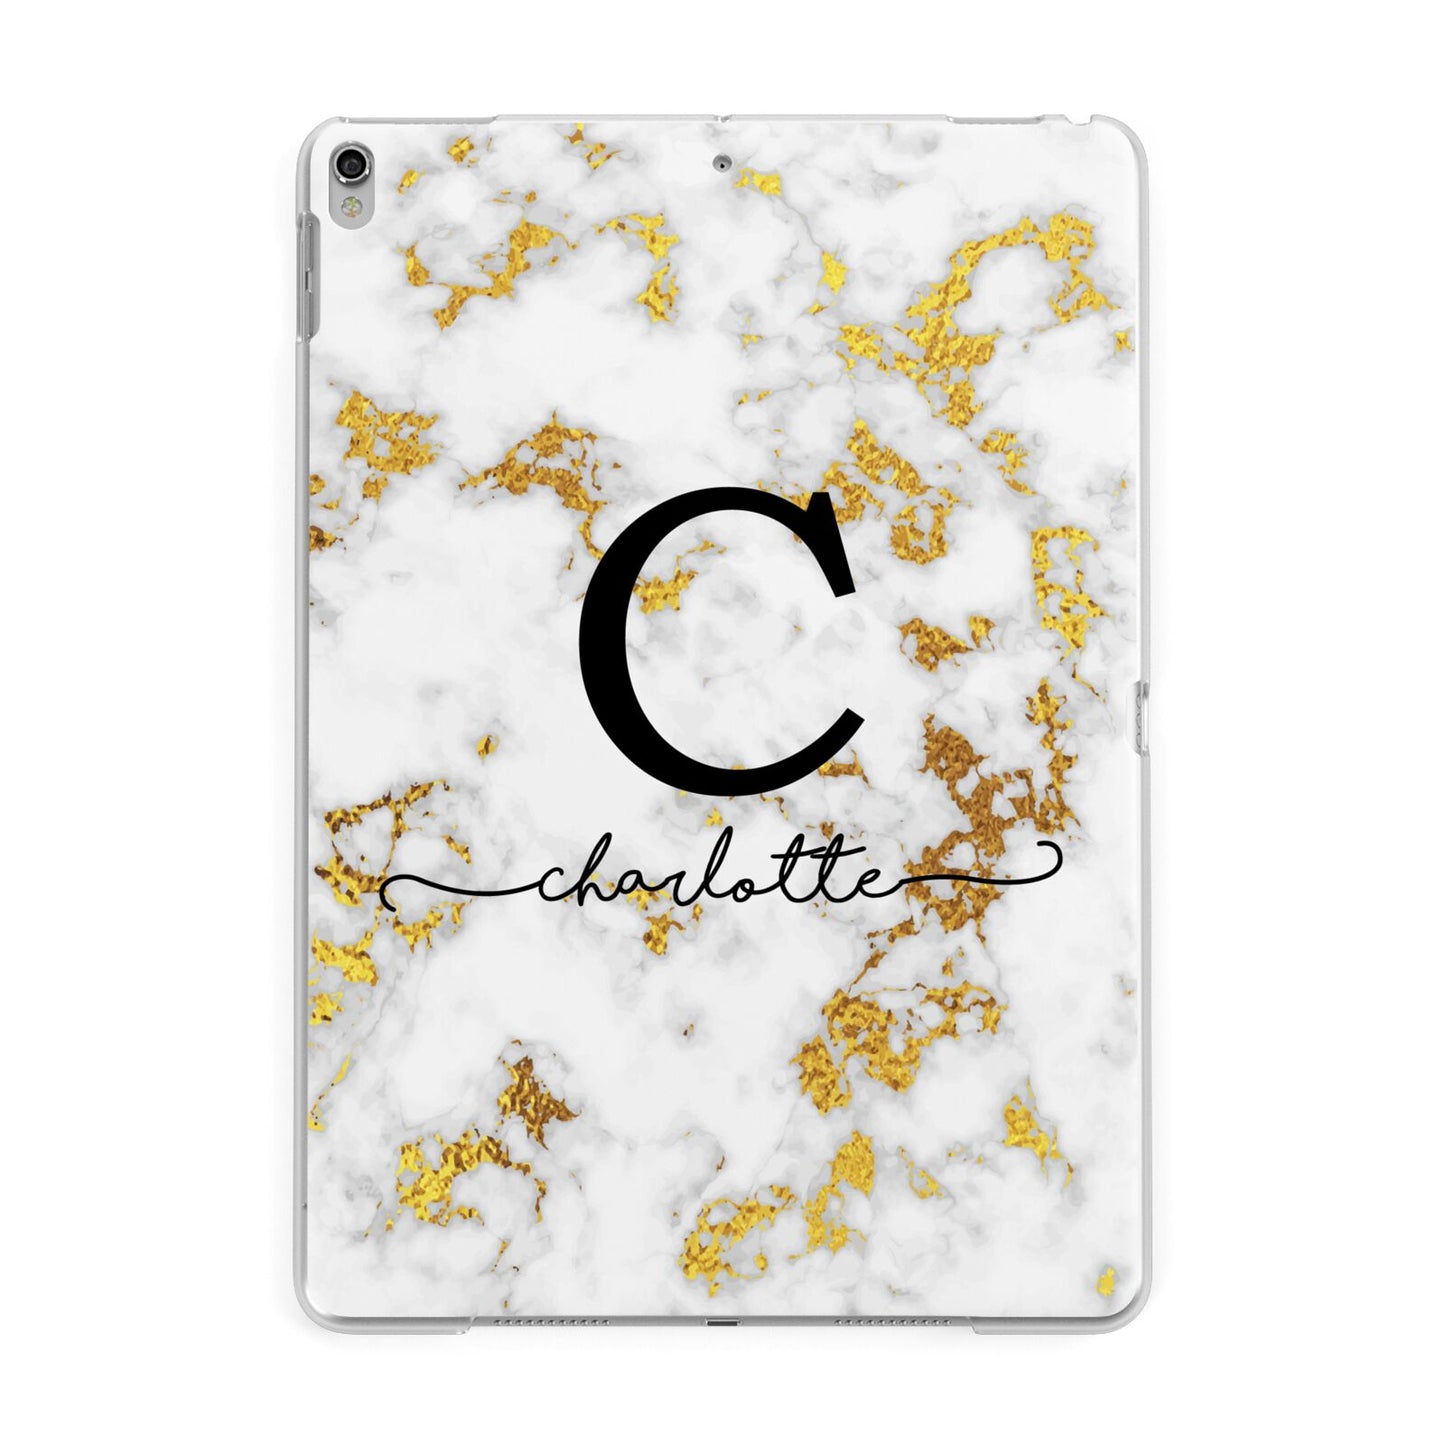 Initialled White Gold Marble with Name Apple iPad Silver Case